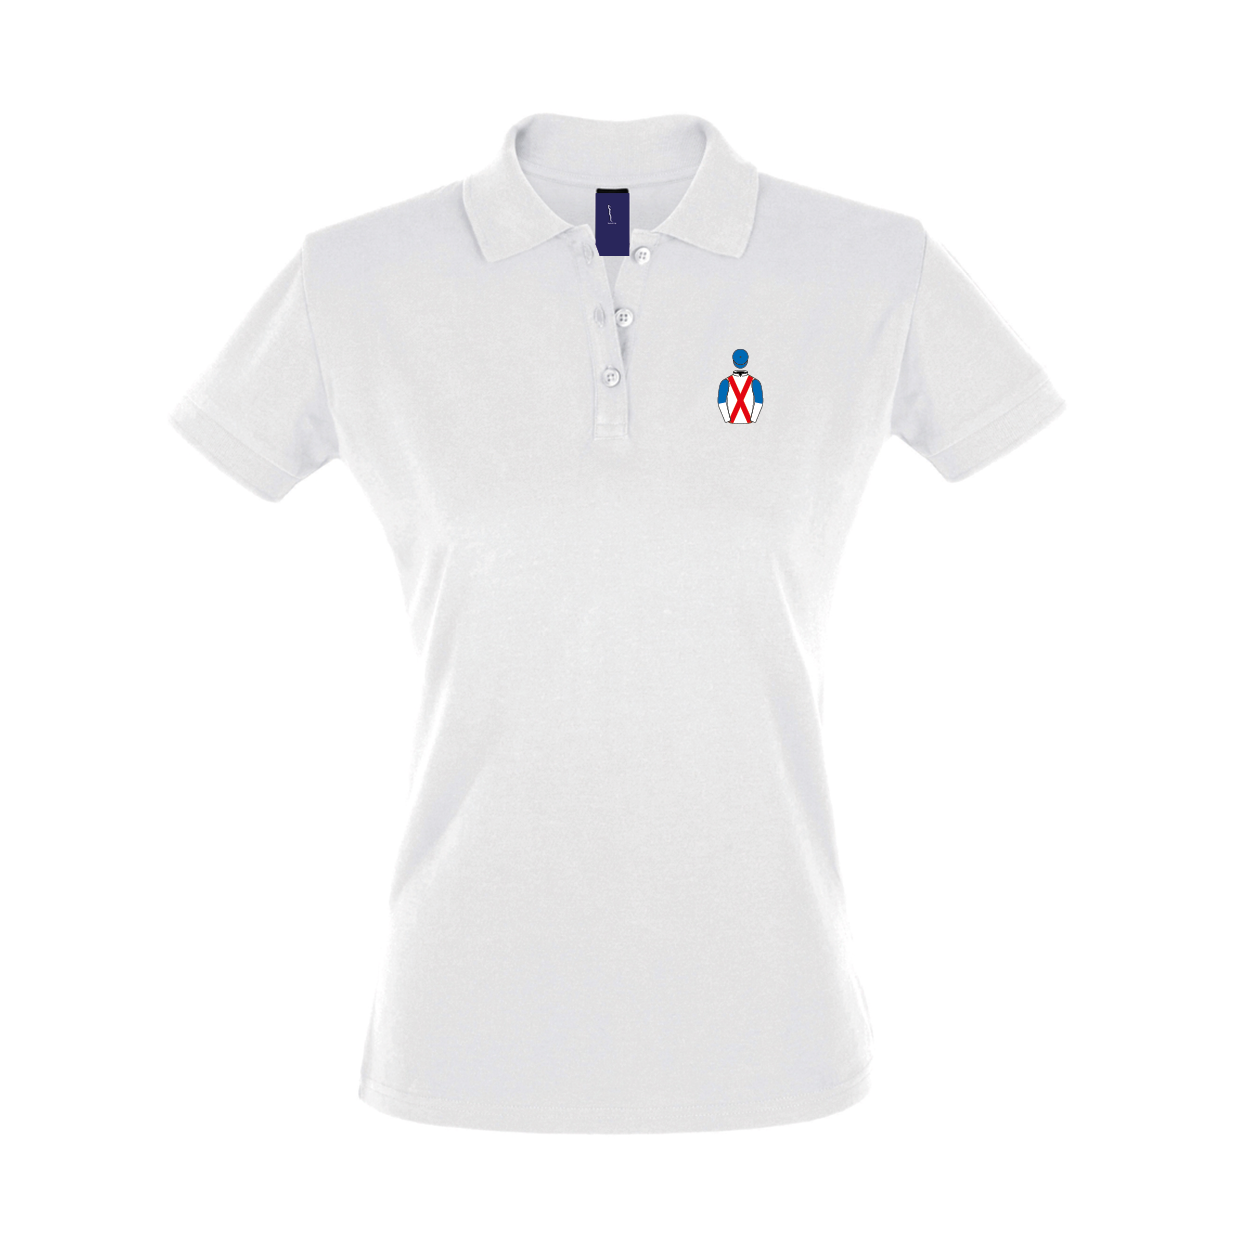 Ladies The British Racing Club Embroidered Polo Shirt - Clothing - Hacked Up